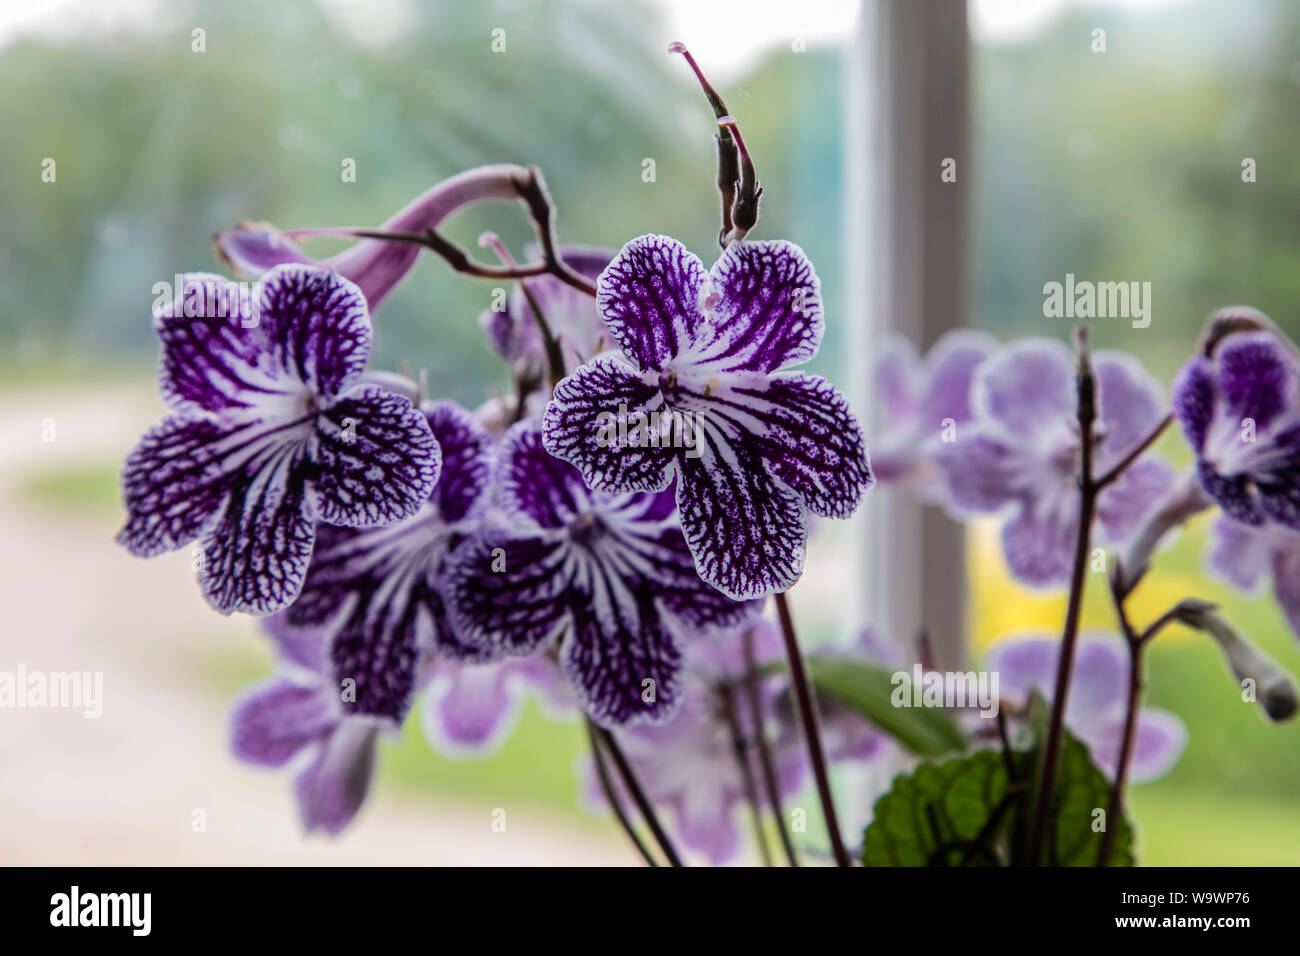 A purple five pedalled flower Stock Photo